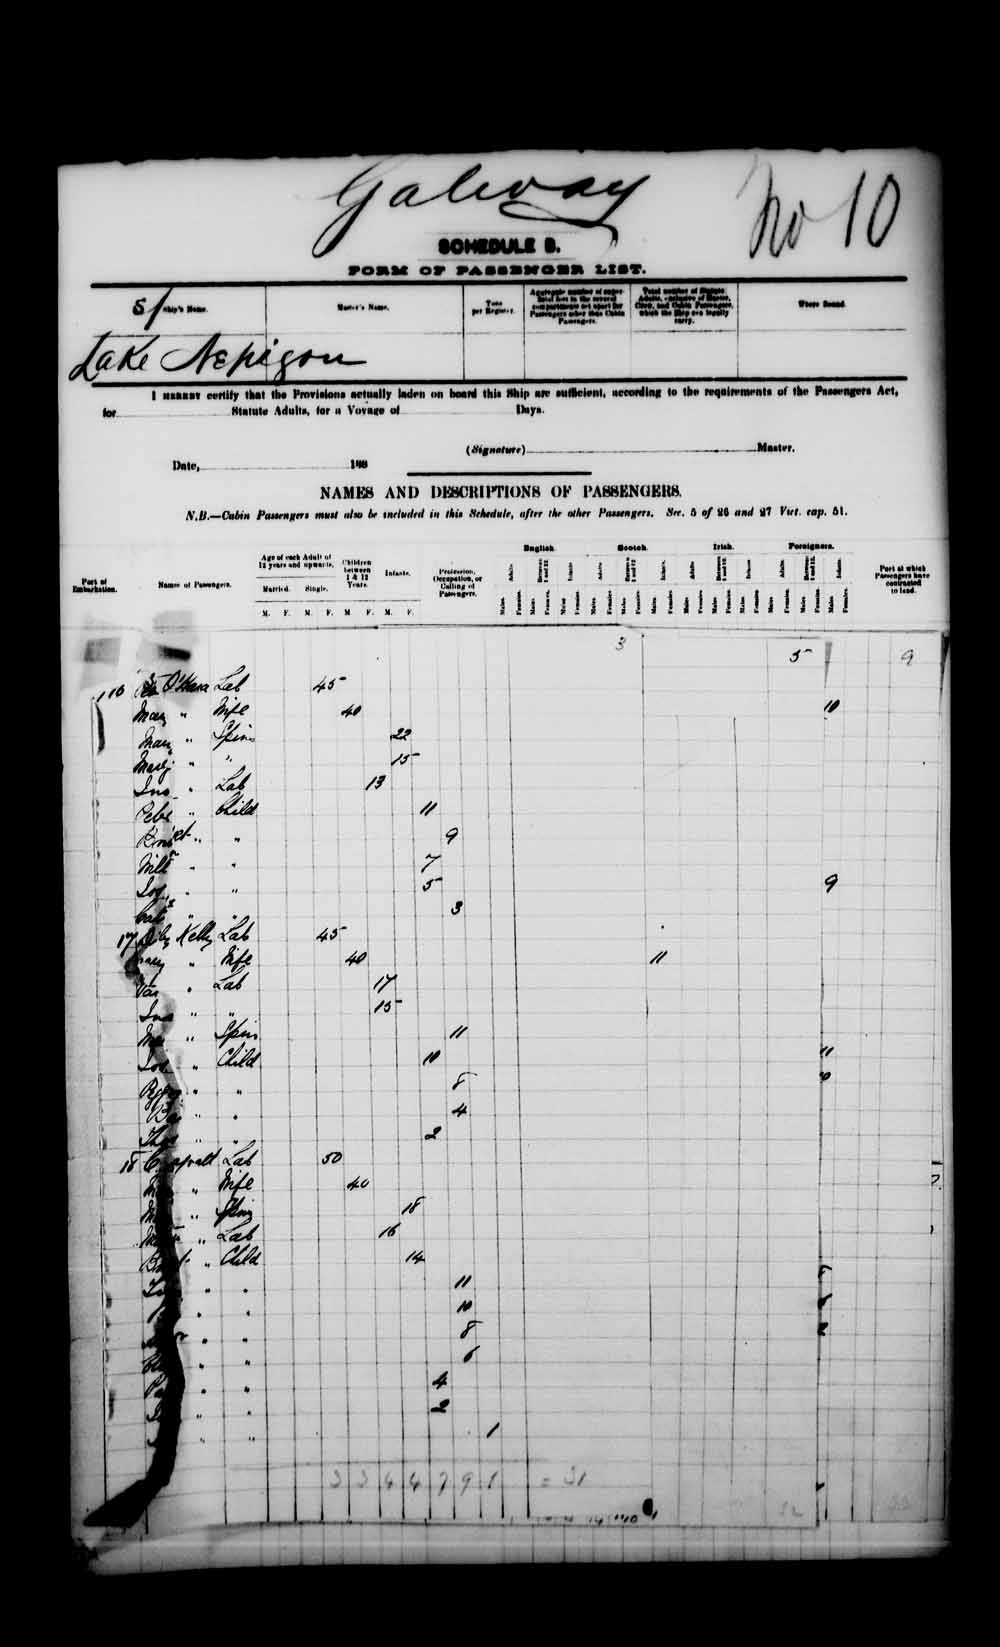 Digitized page of Passenger Lists for Image No.: e003541459